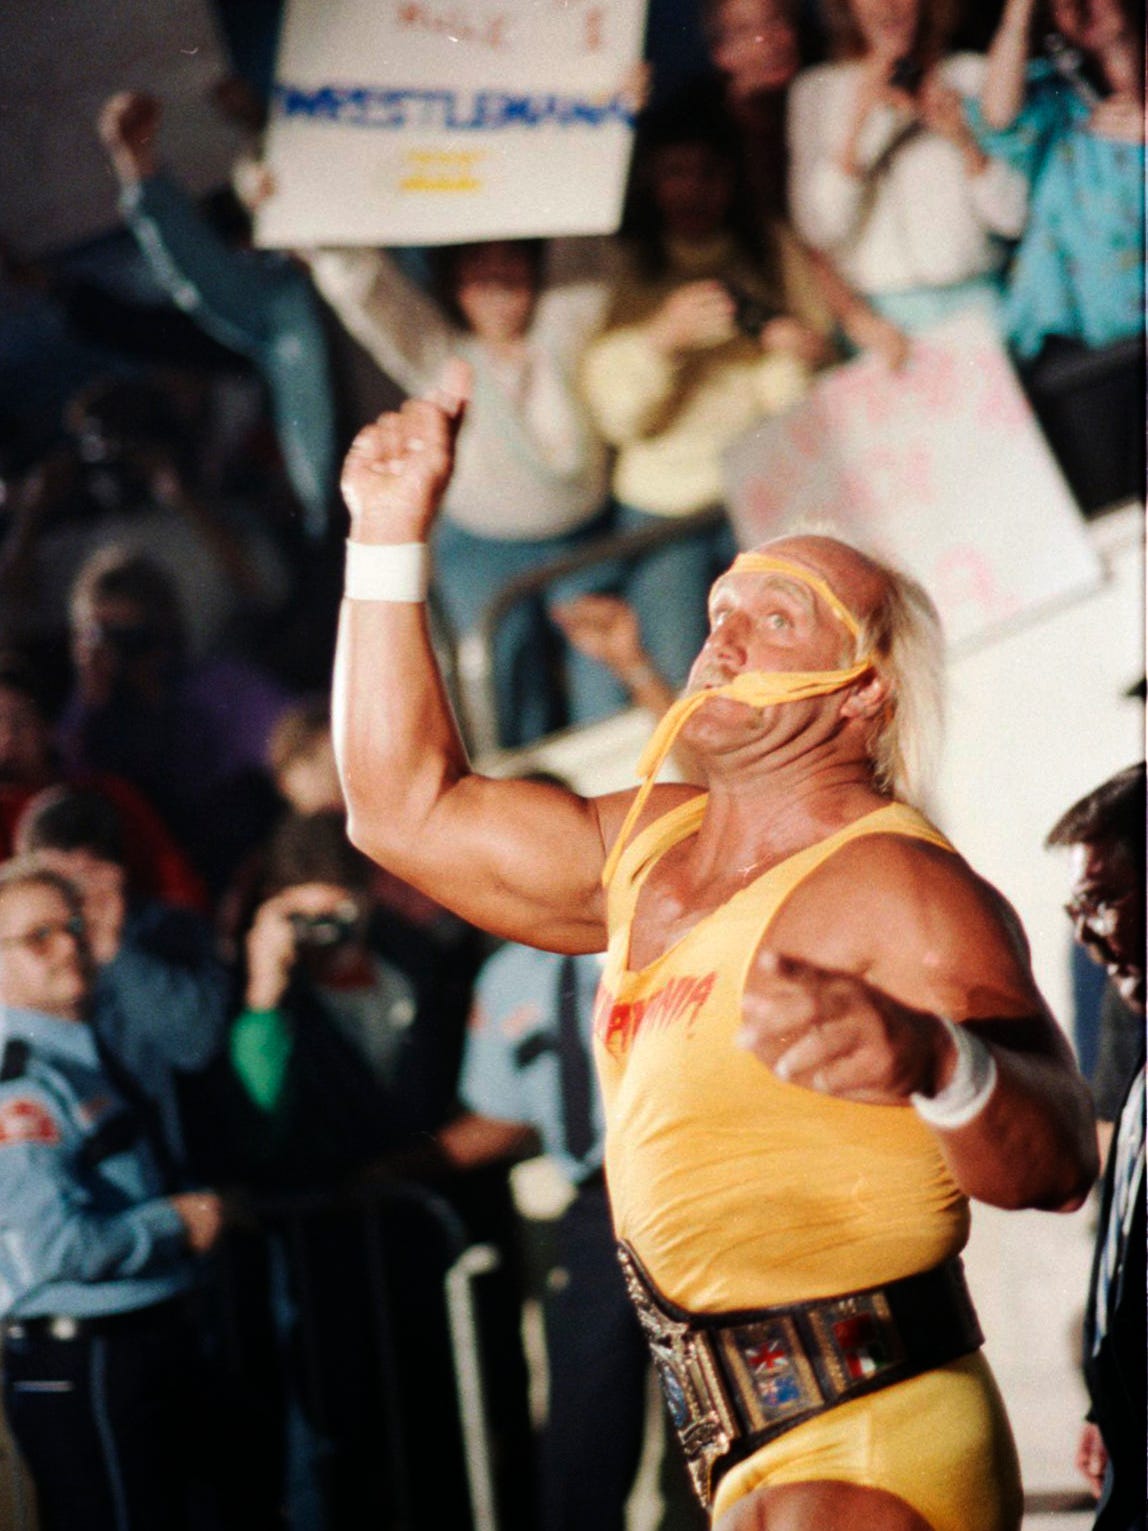 Hulk Hogan makes his way down the aisle at WrestleMania III, for his heavyweight-championship bout with Andre the Giant.